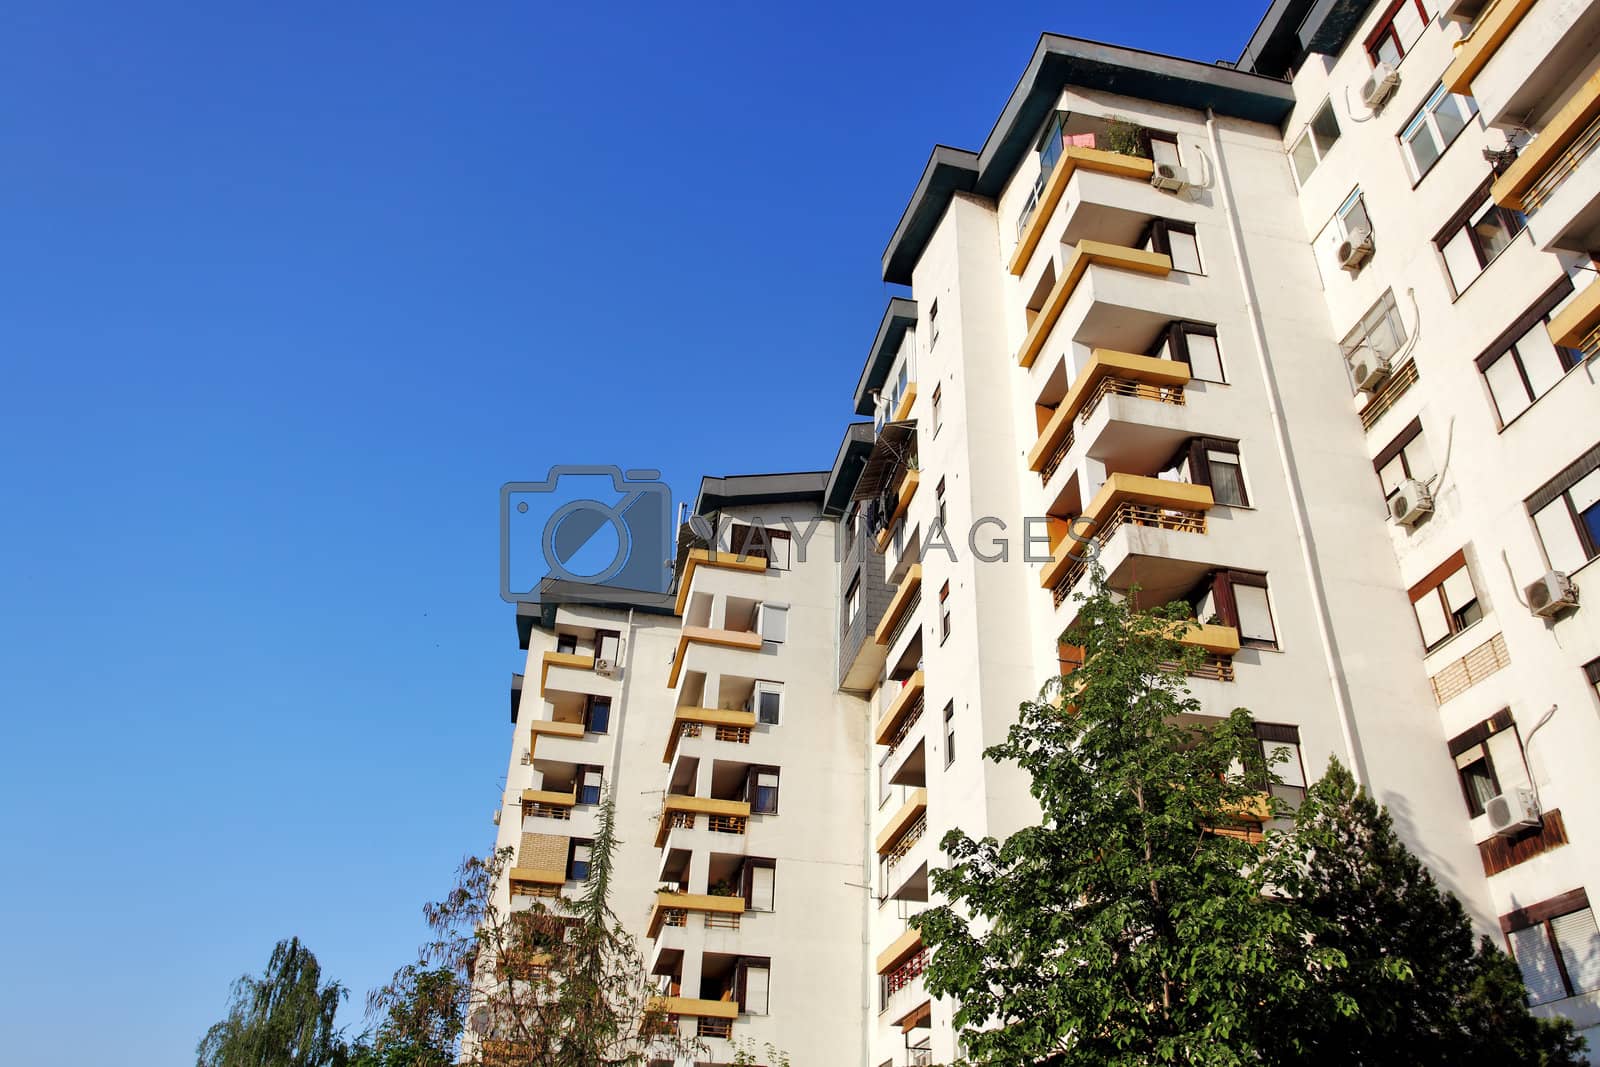 Royalty free image of apartment complex by kokimk